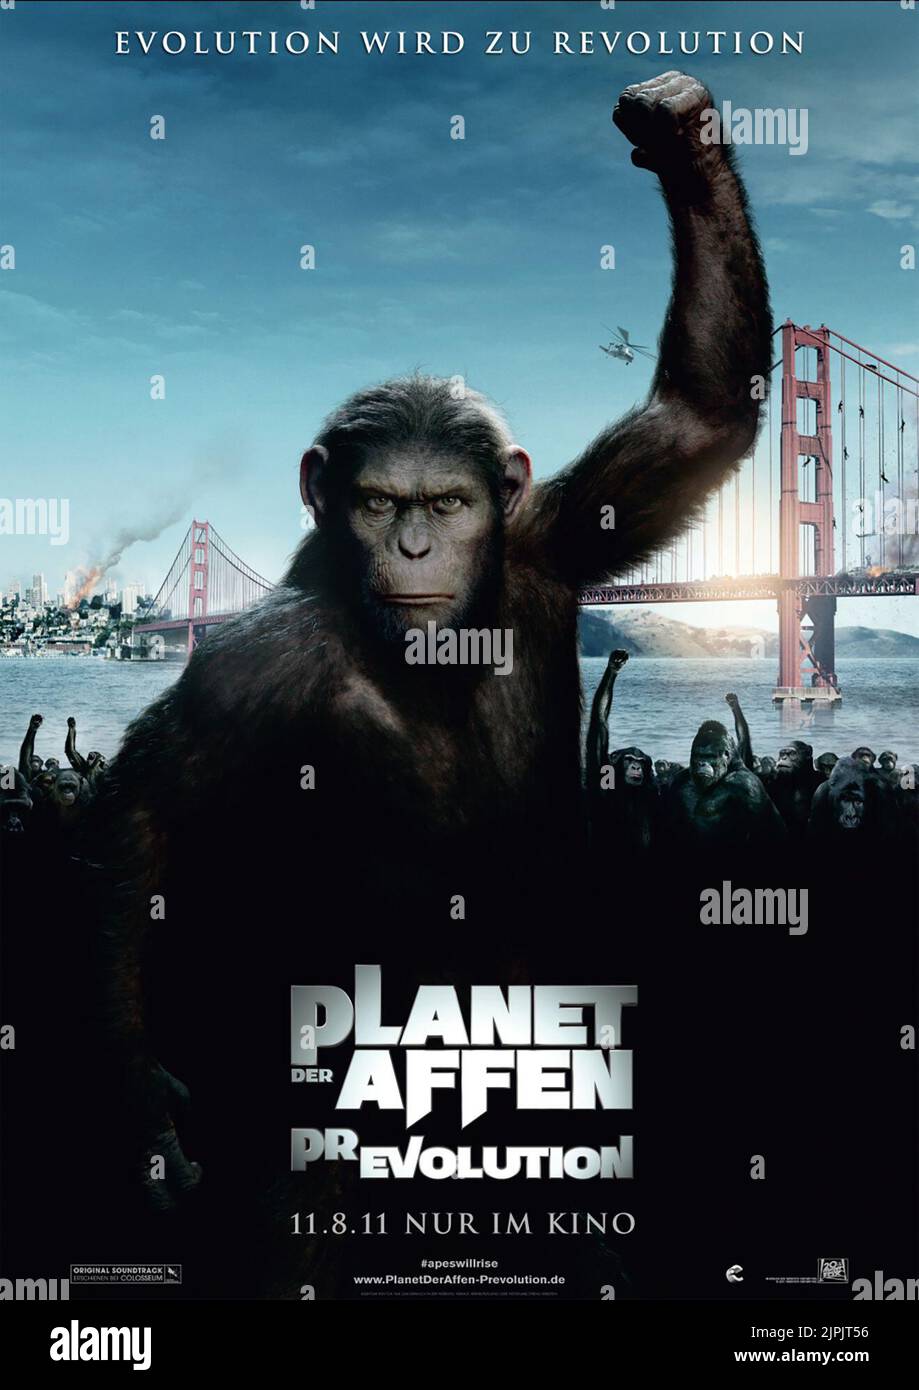 FILM POSTER, RISE OF THE PLANET OF THE APES, 2011 Stock Photo